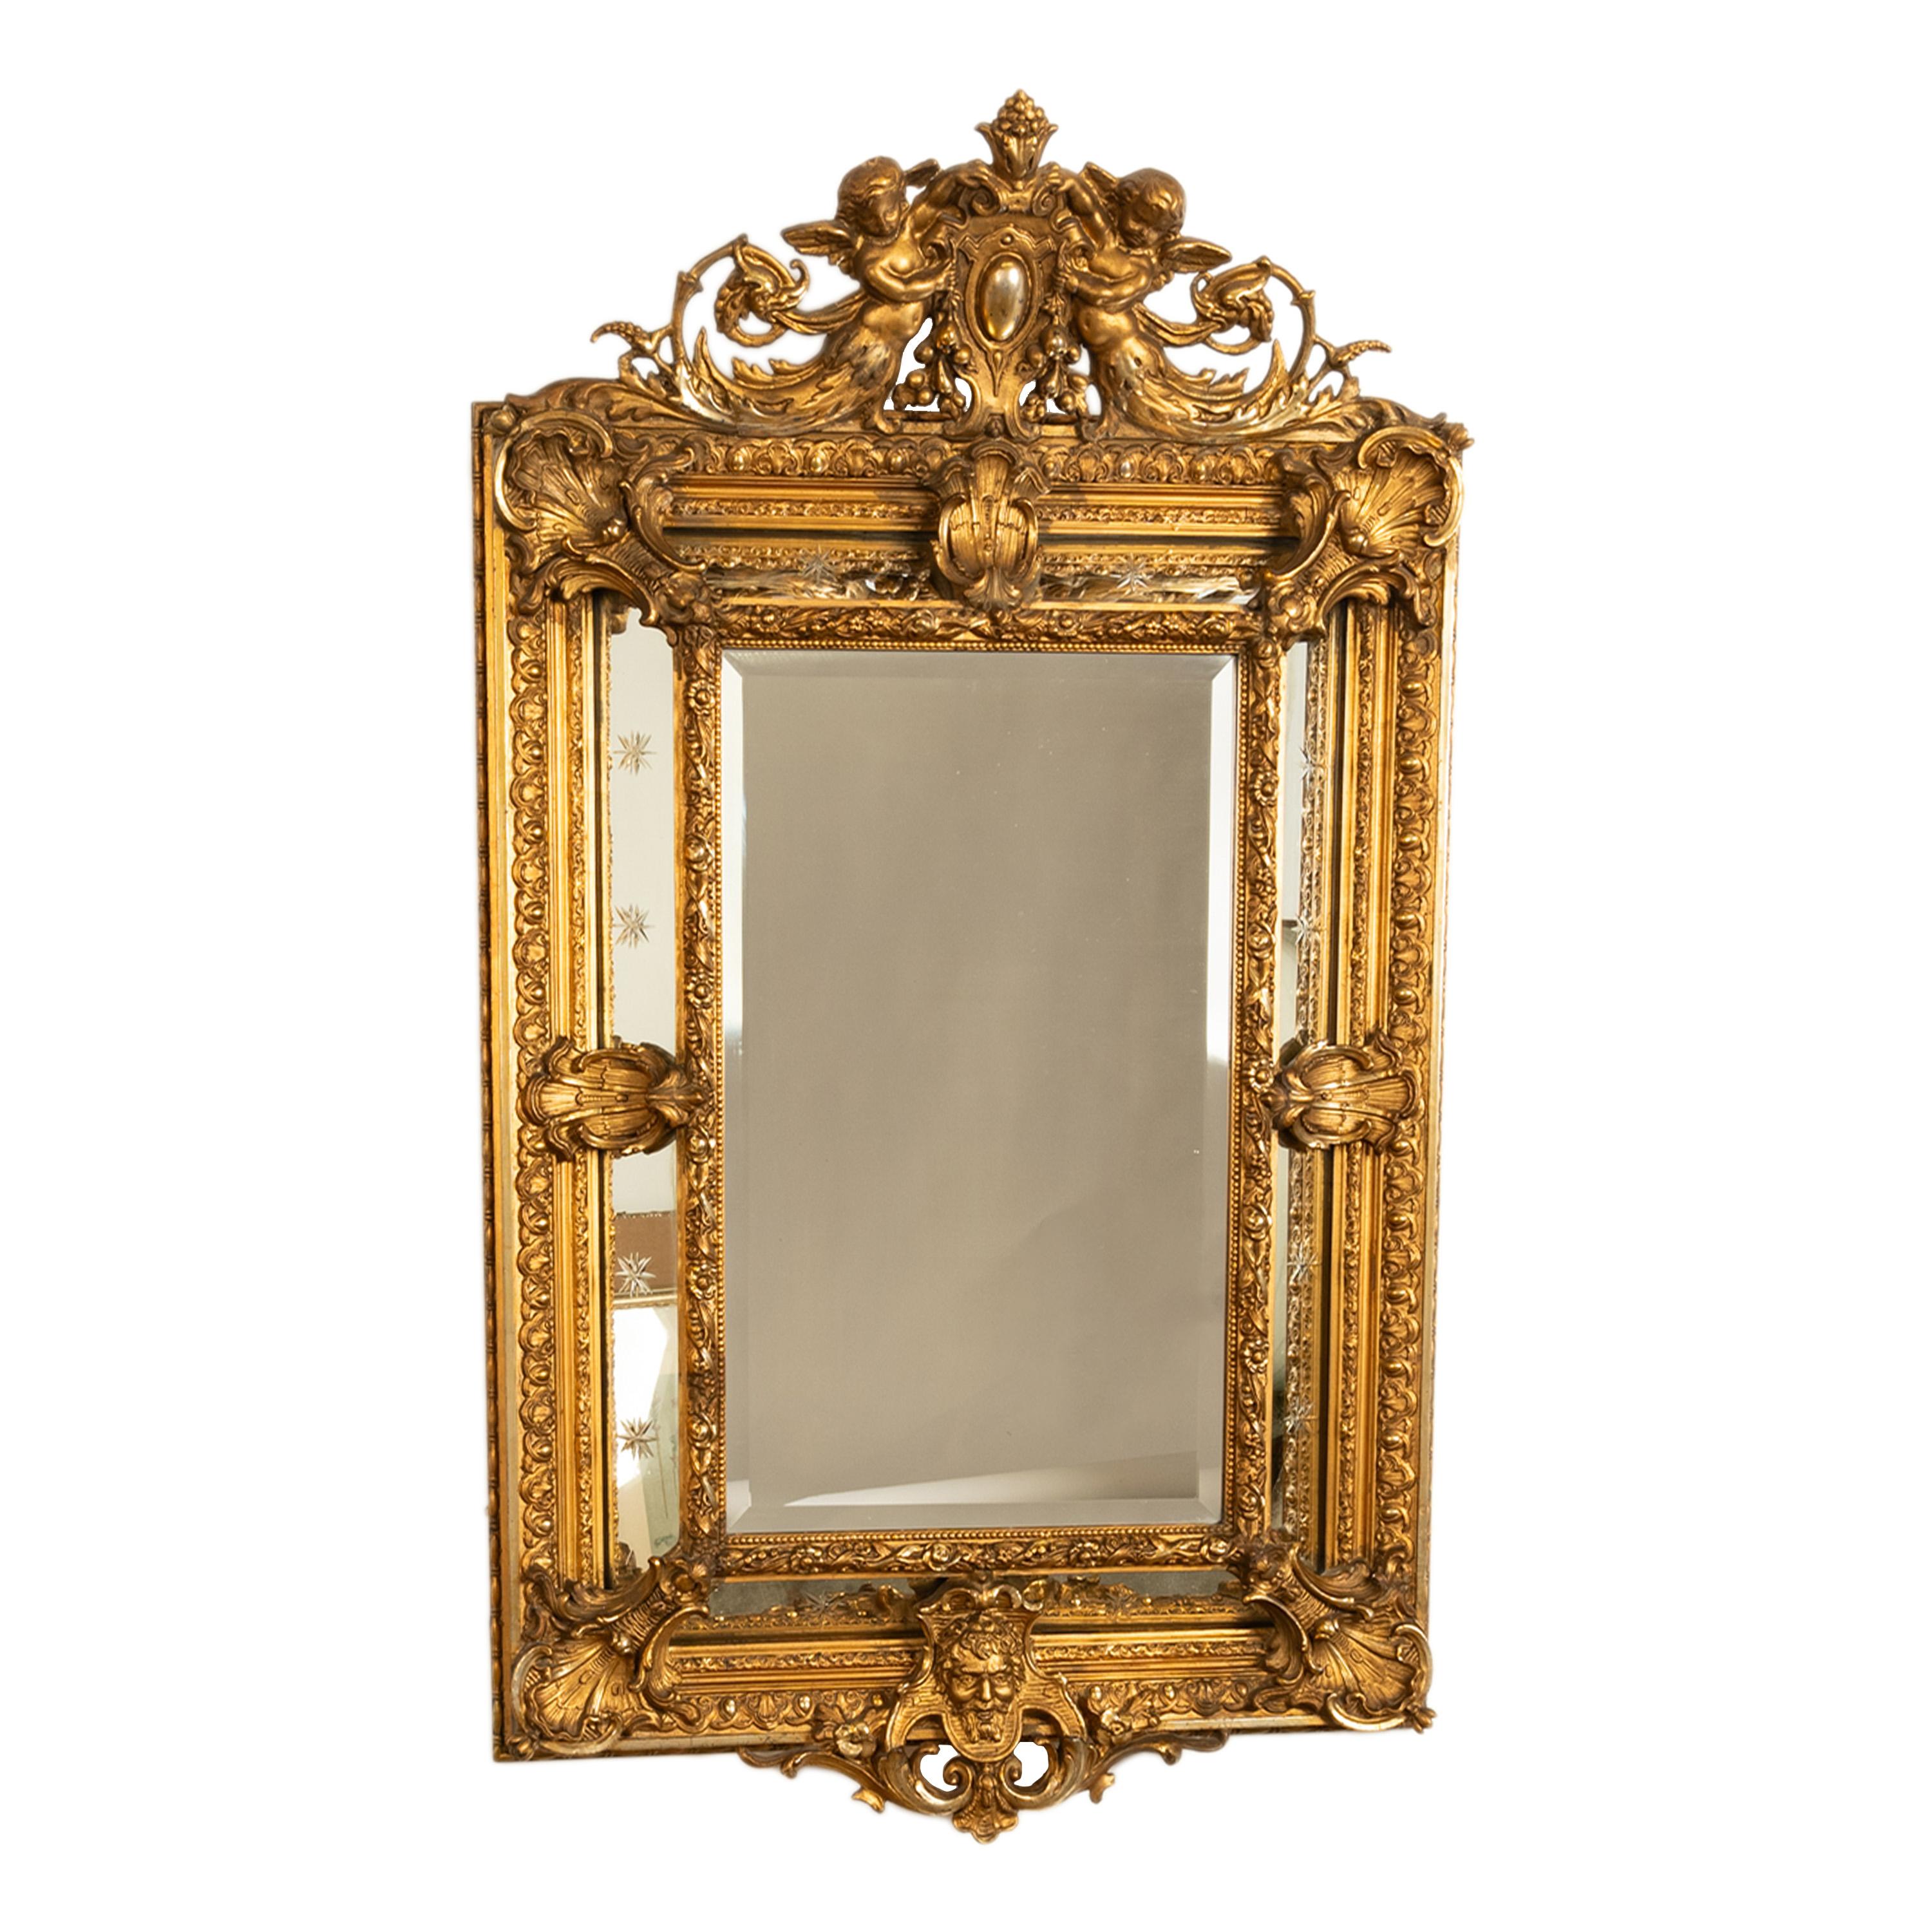 A large & fine antique 19th century French giltwood Louis XV Rococo mirror, of superior quality, circa 1870.
The mirror having an shield shaped cartouche to the top, held by a pair of winged cherubs. The mirror being of cushion shape and to the